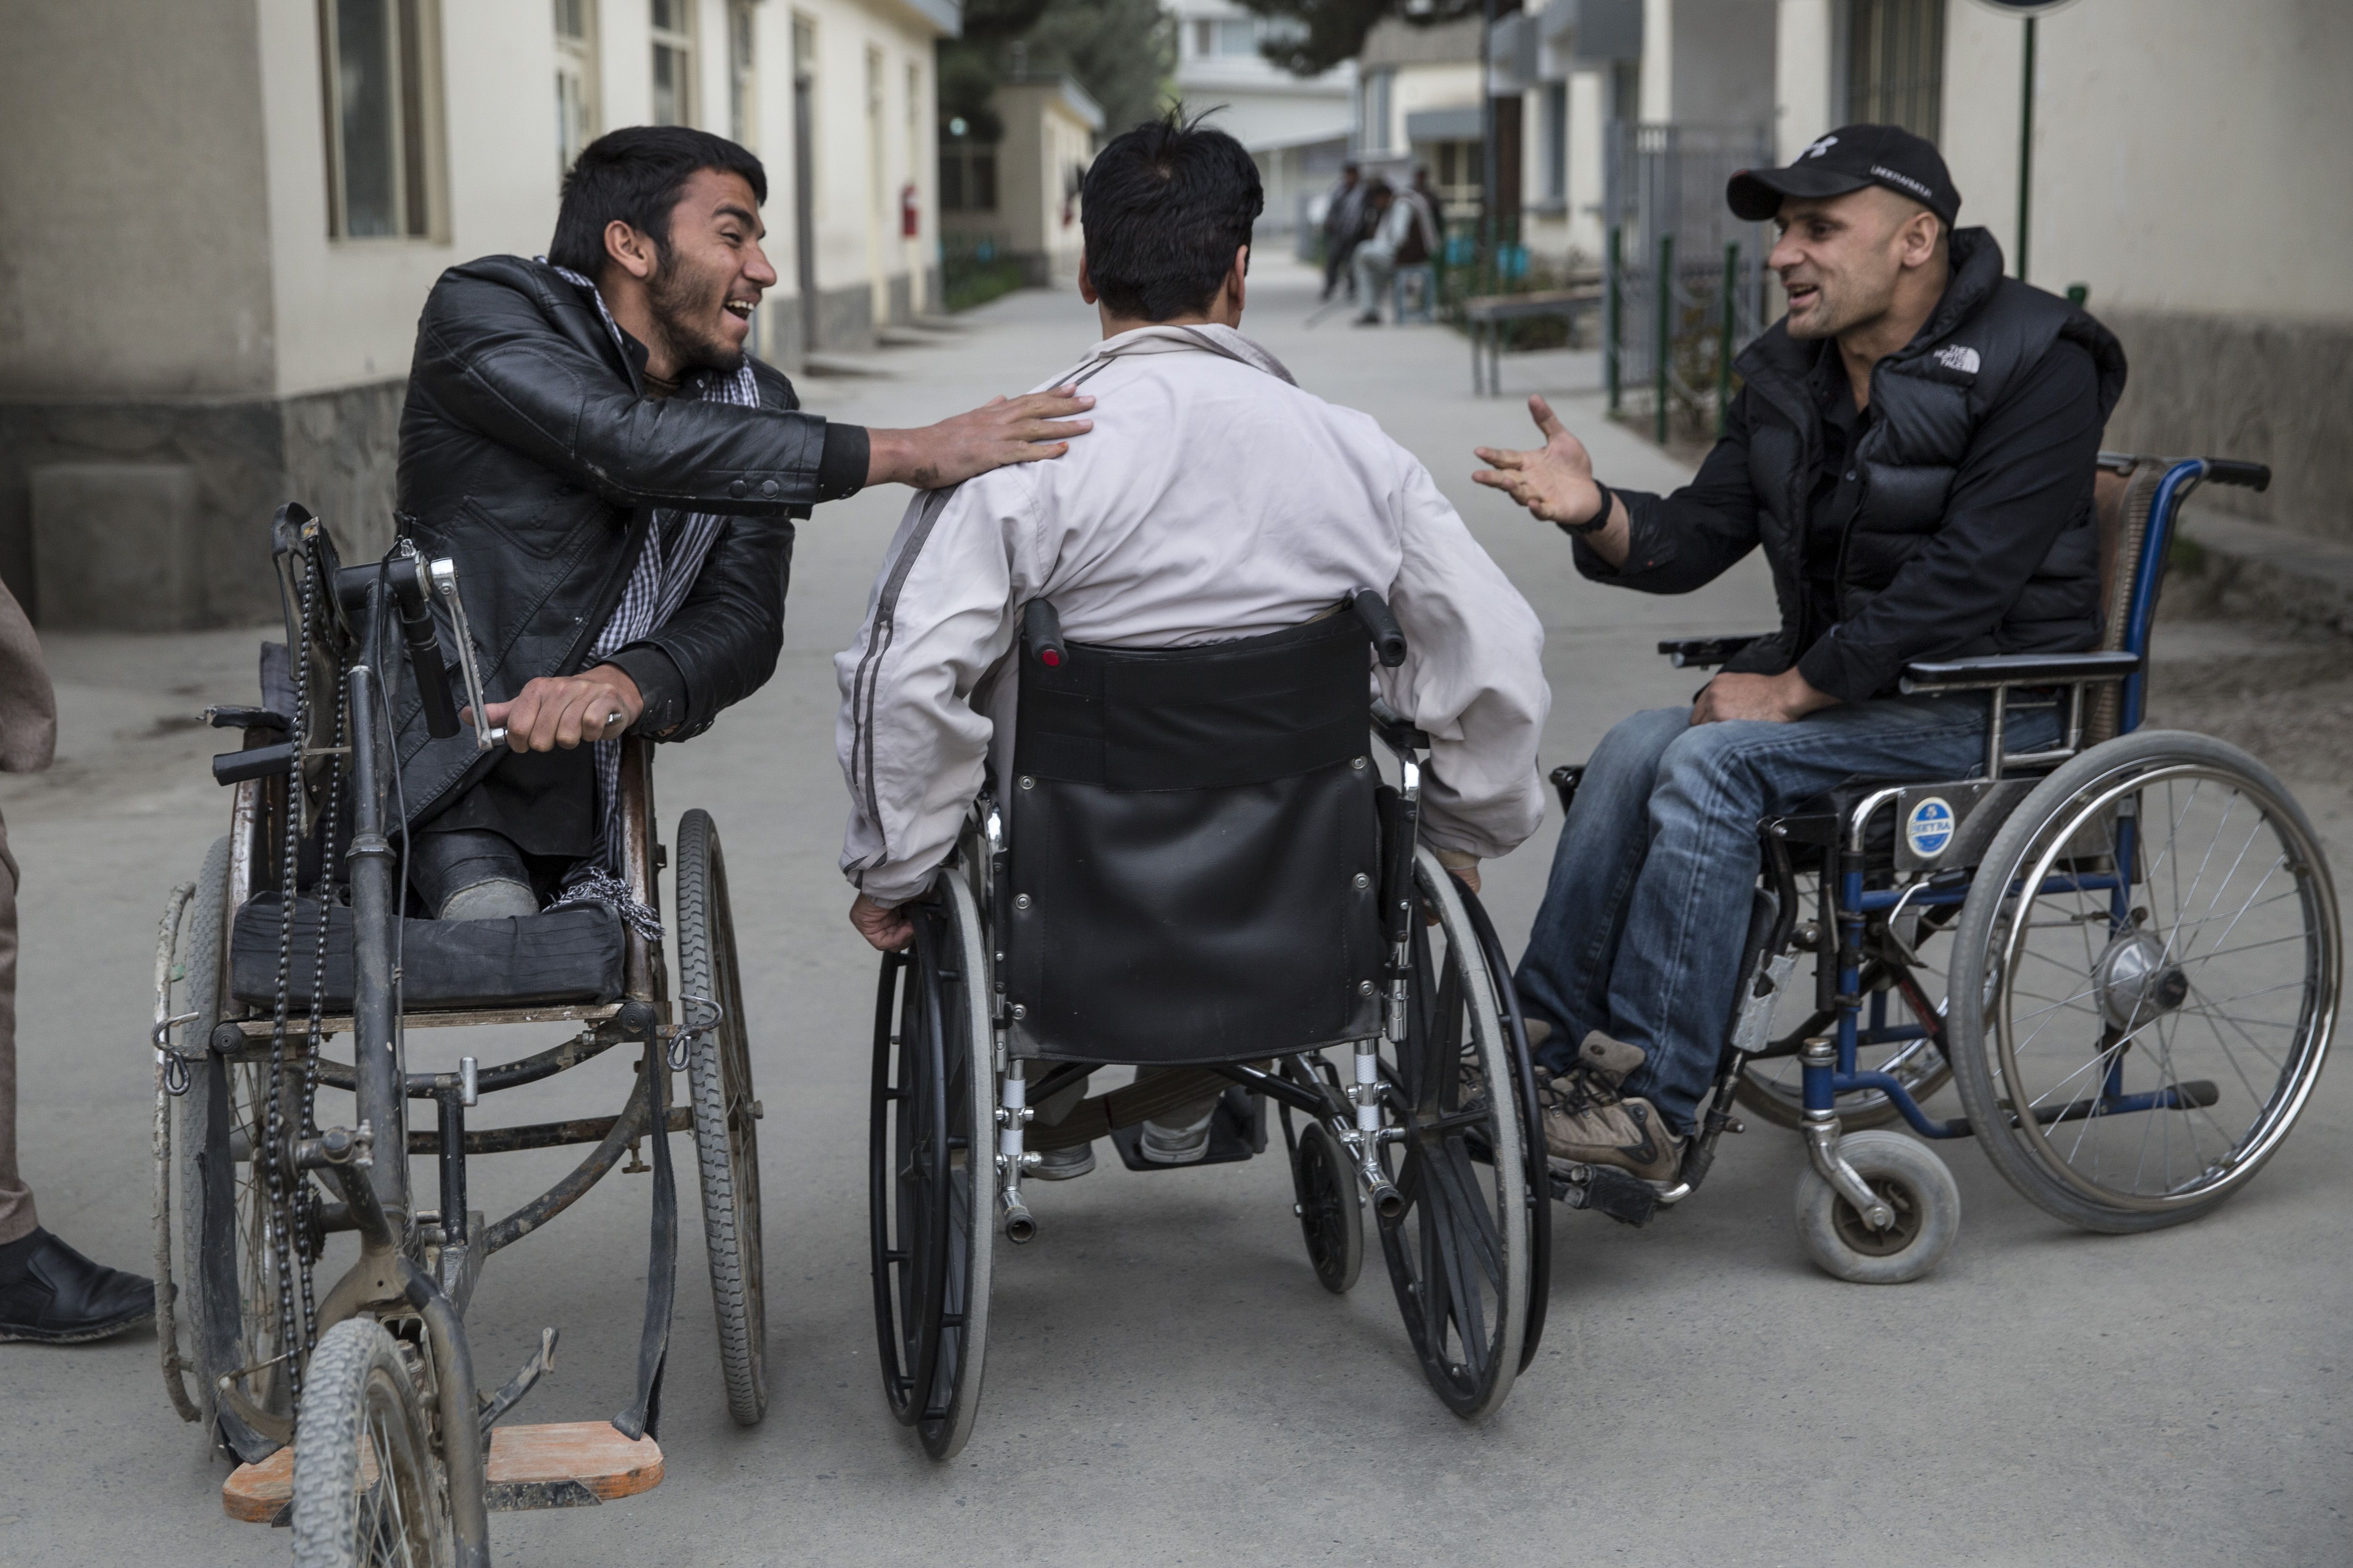 Nasrullah, left, chats with friends outside the orthopedic center. Image by Paula Bronstein. Afghanistan, 2015.